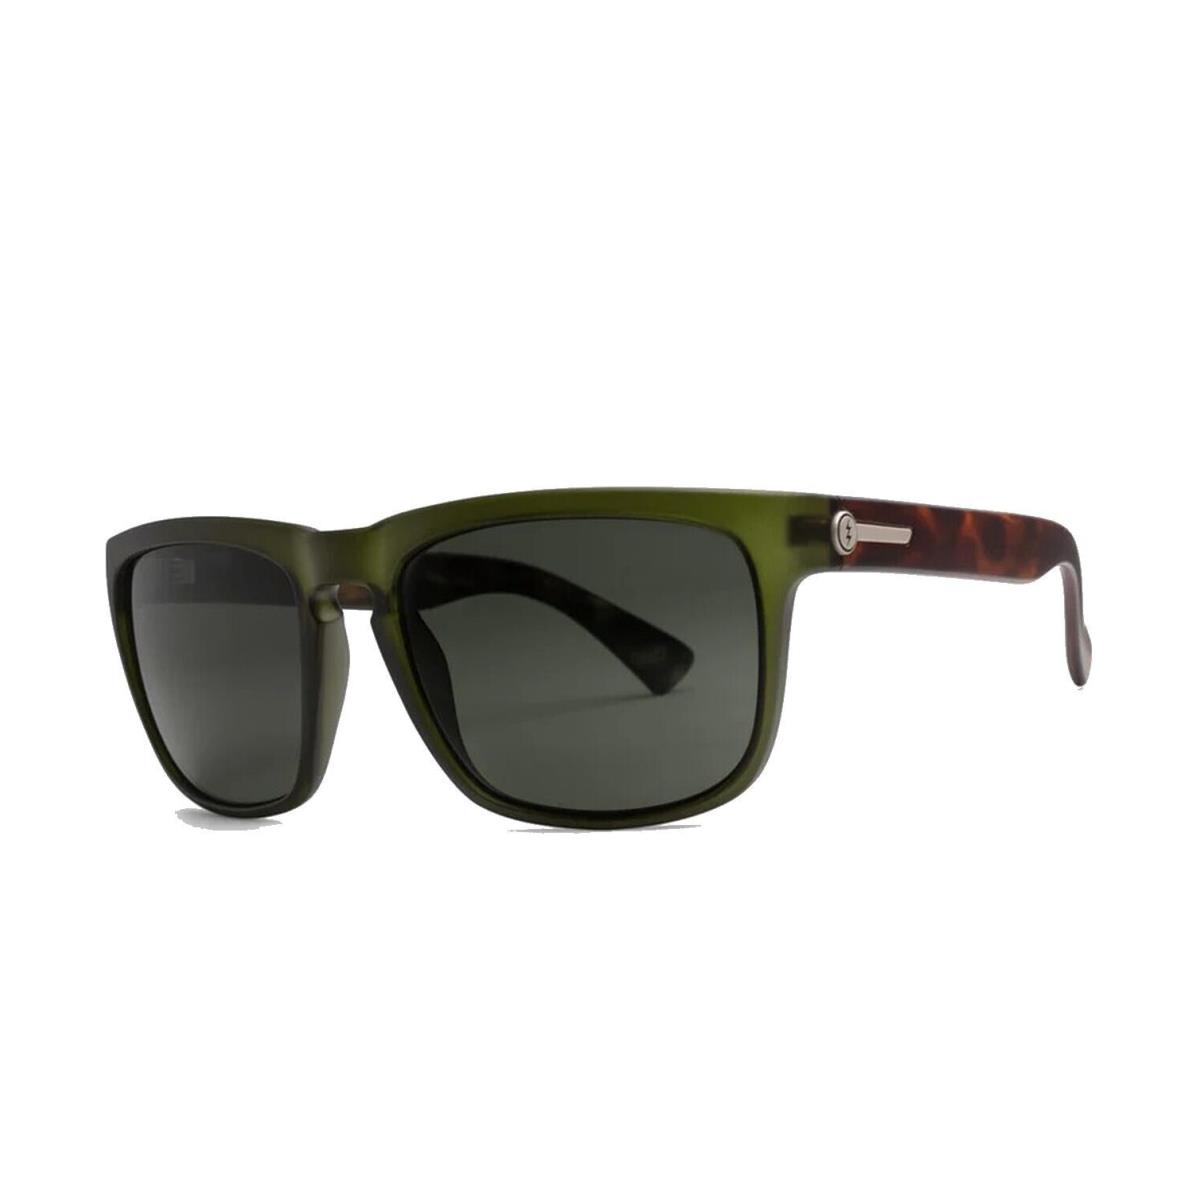 Electric Knoxville Sunglasses Sage Green/ Tort with Grey Polarized Lens 56mm